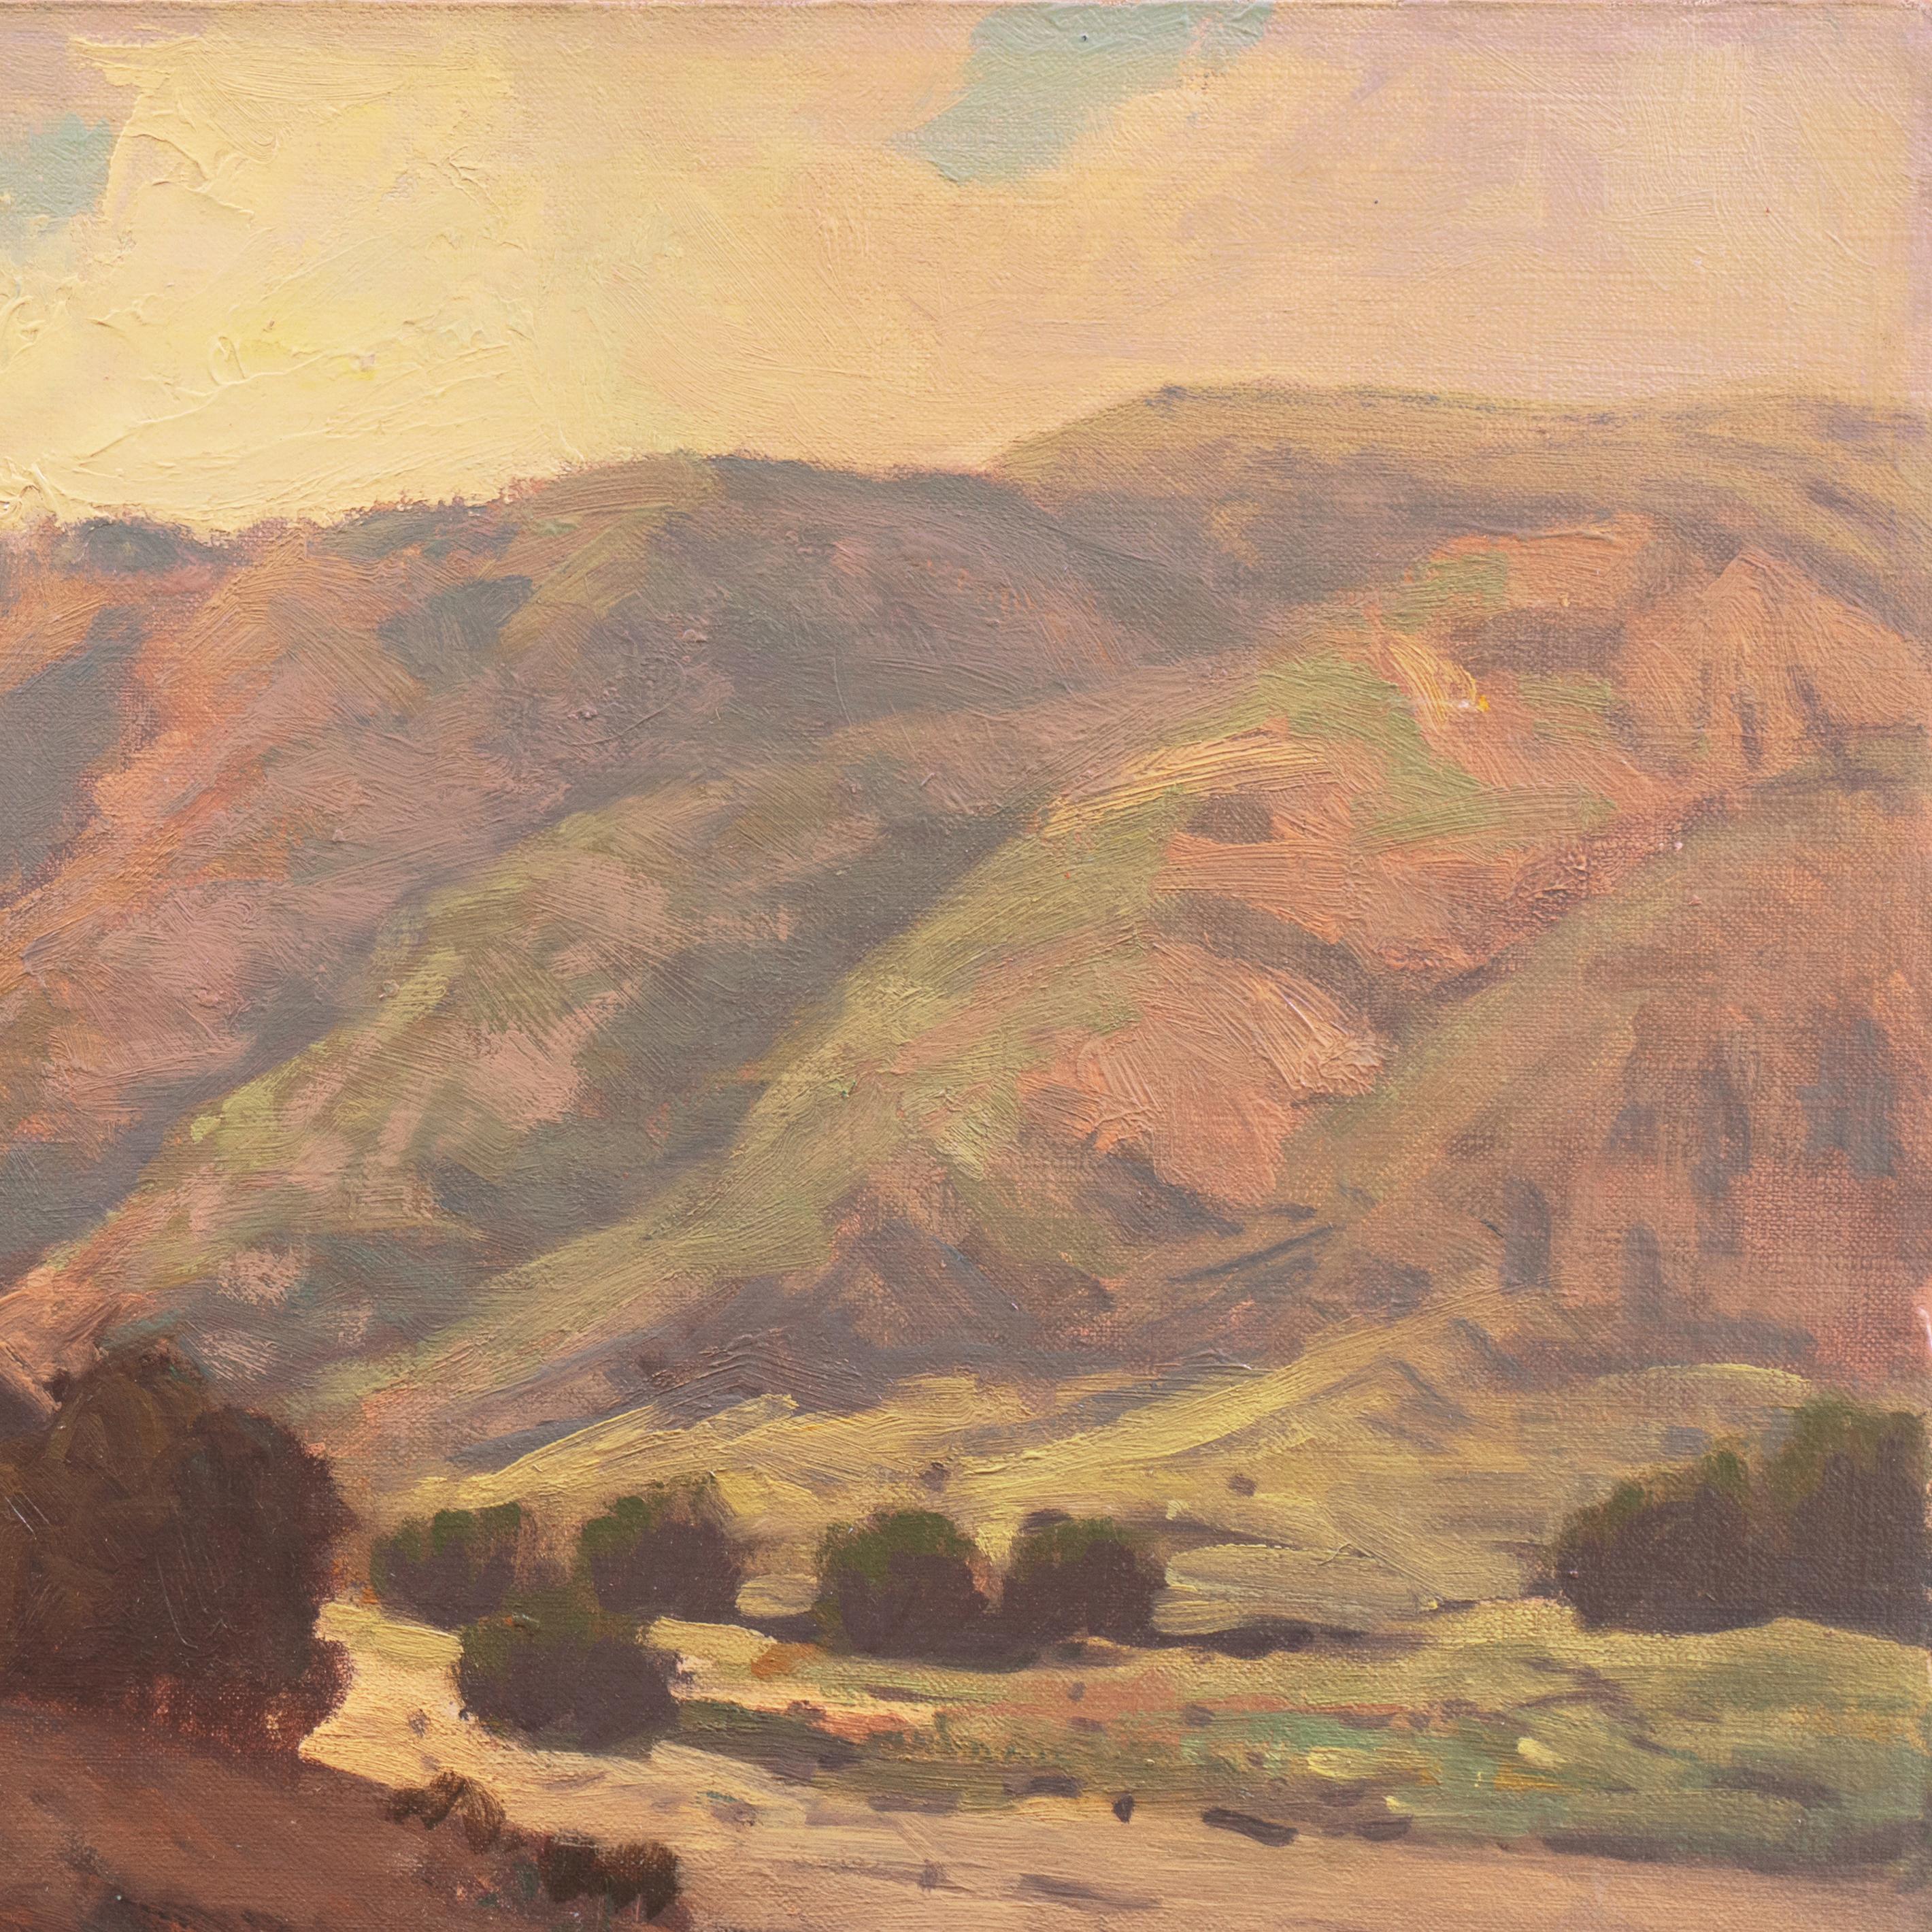 'California Sunset, Lilac and Rose', Palm Springs, Golden Gate Exhibition, LACMA - Impressionist Painting by William Krehm